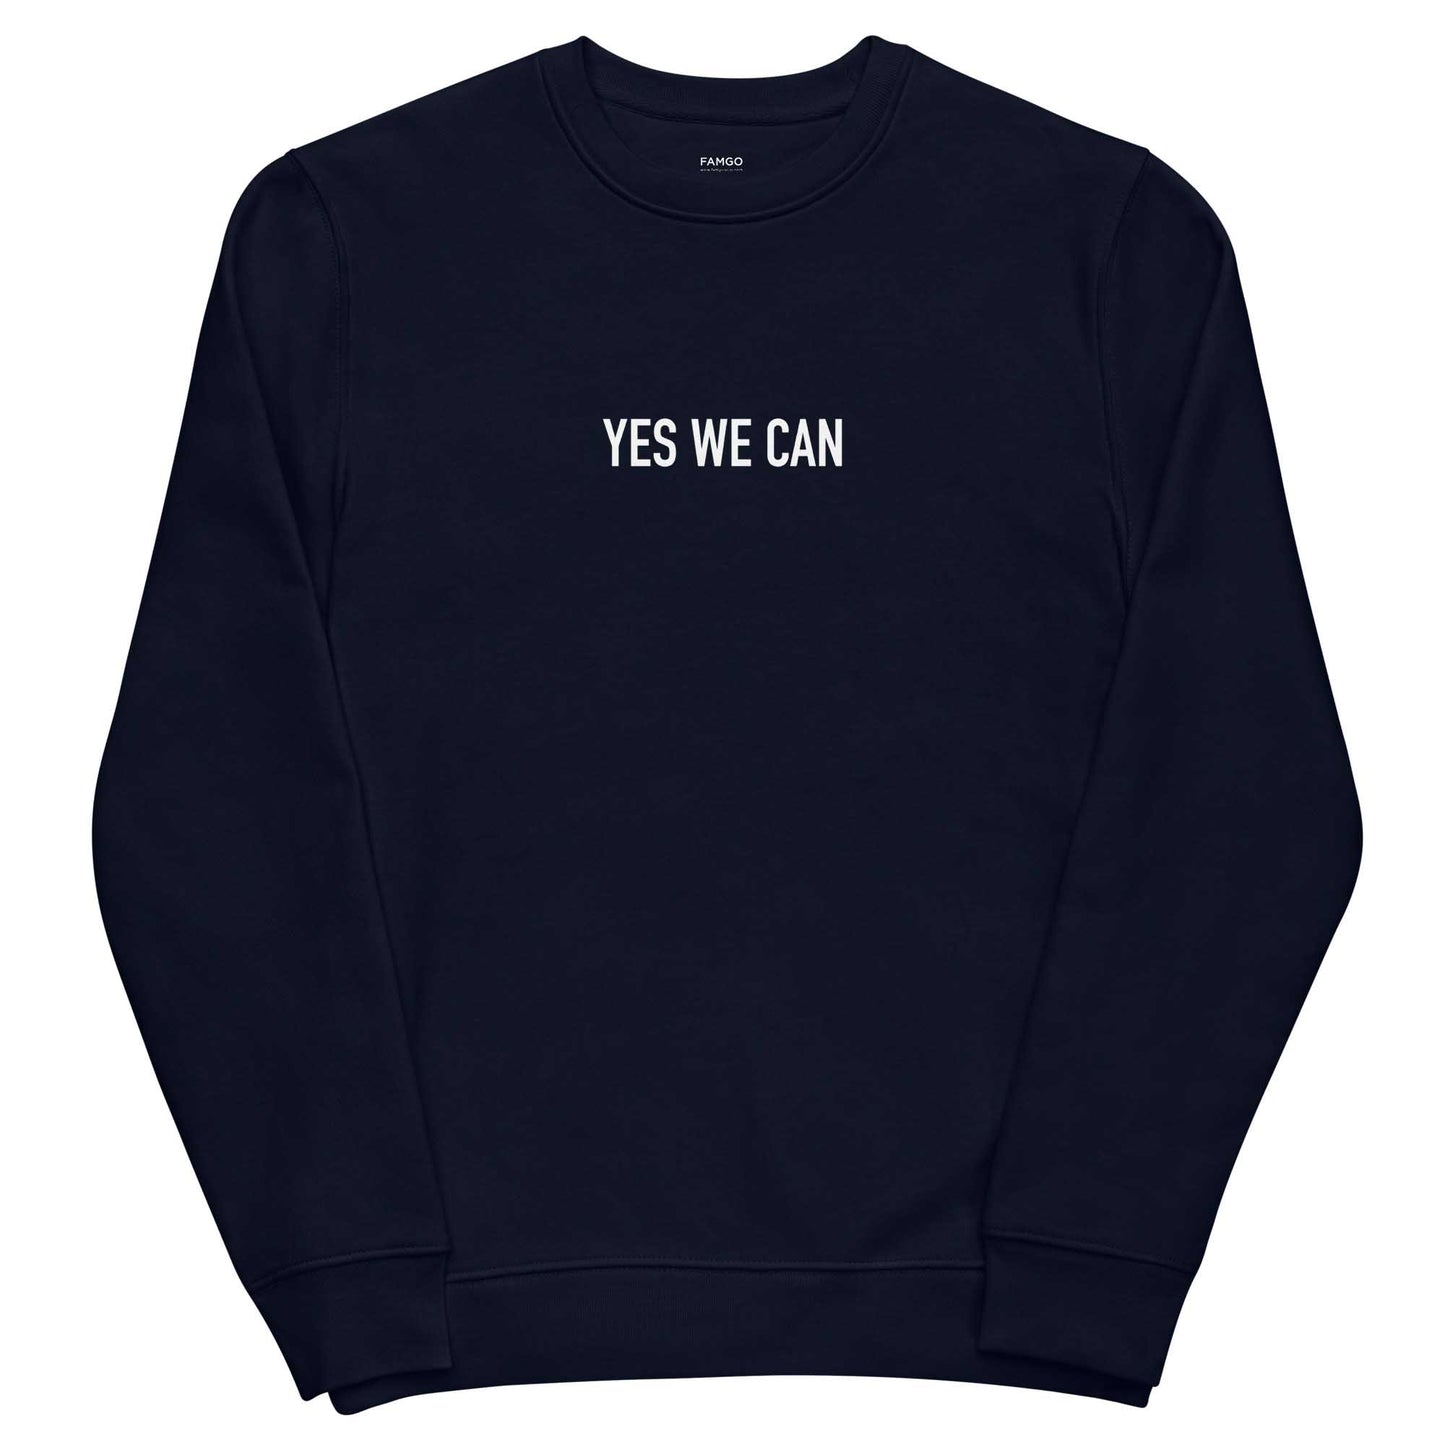 Men navy sustainable sweatshirt with Barack Obama's inspirational quote, "Yes We Can."